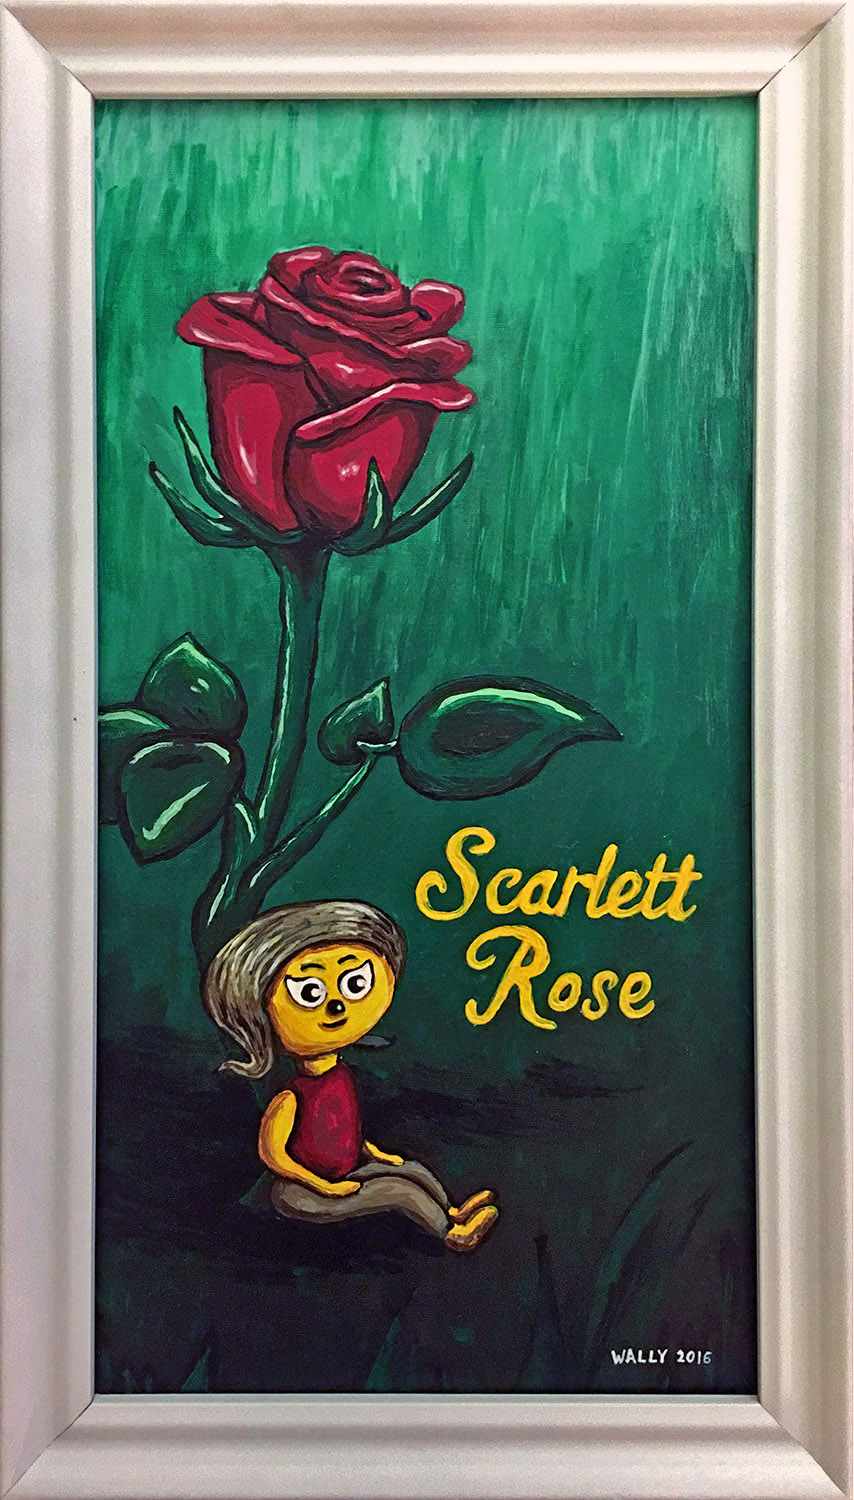 "Scarlett Rose" acrylic on canvas painting by Josh Wallace